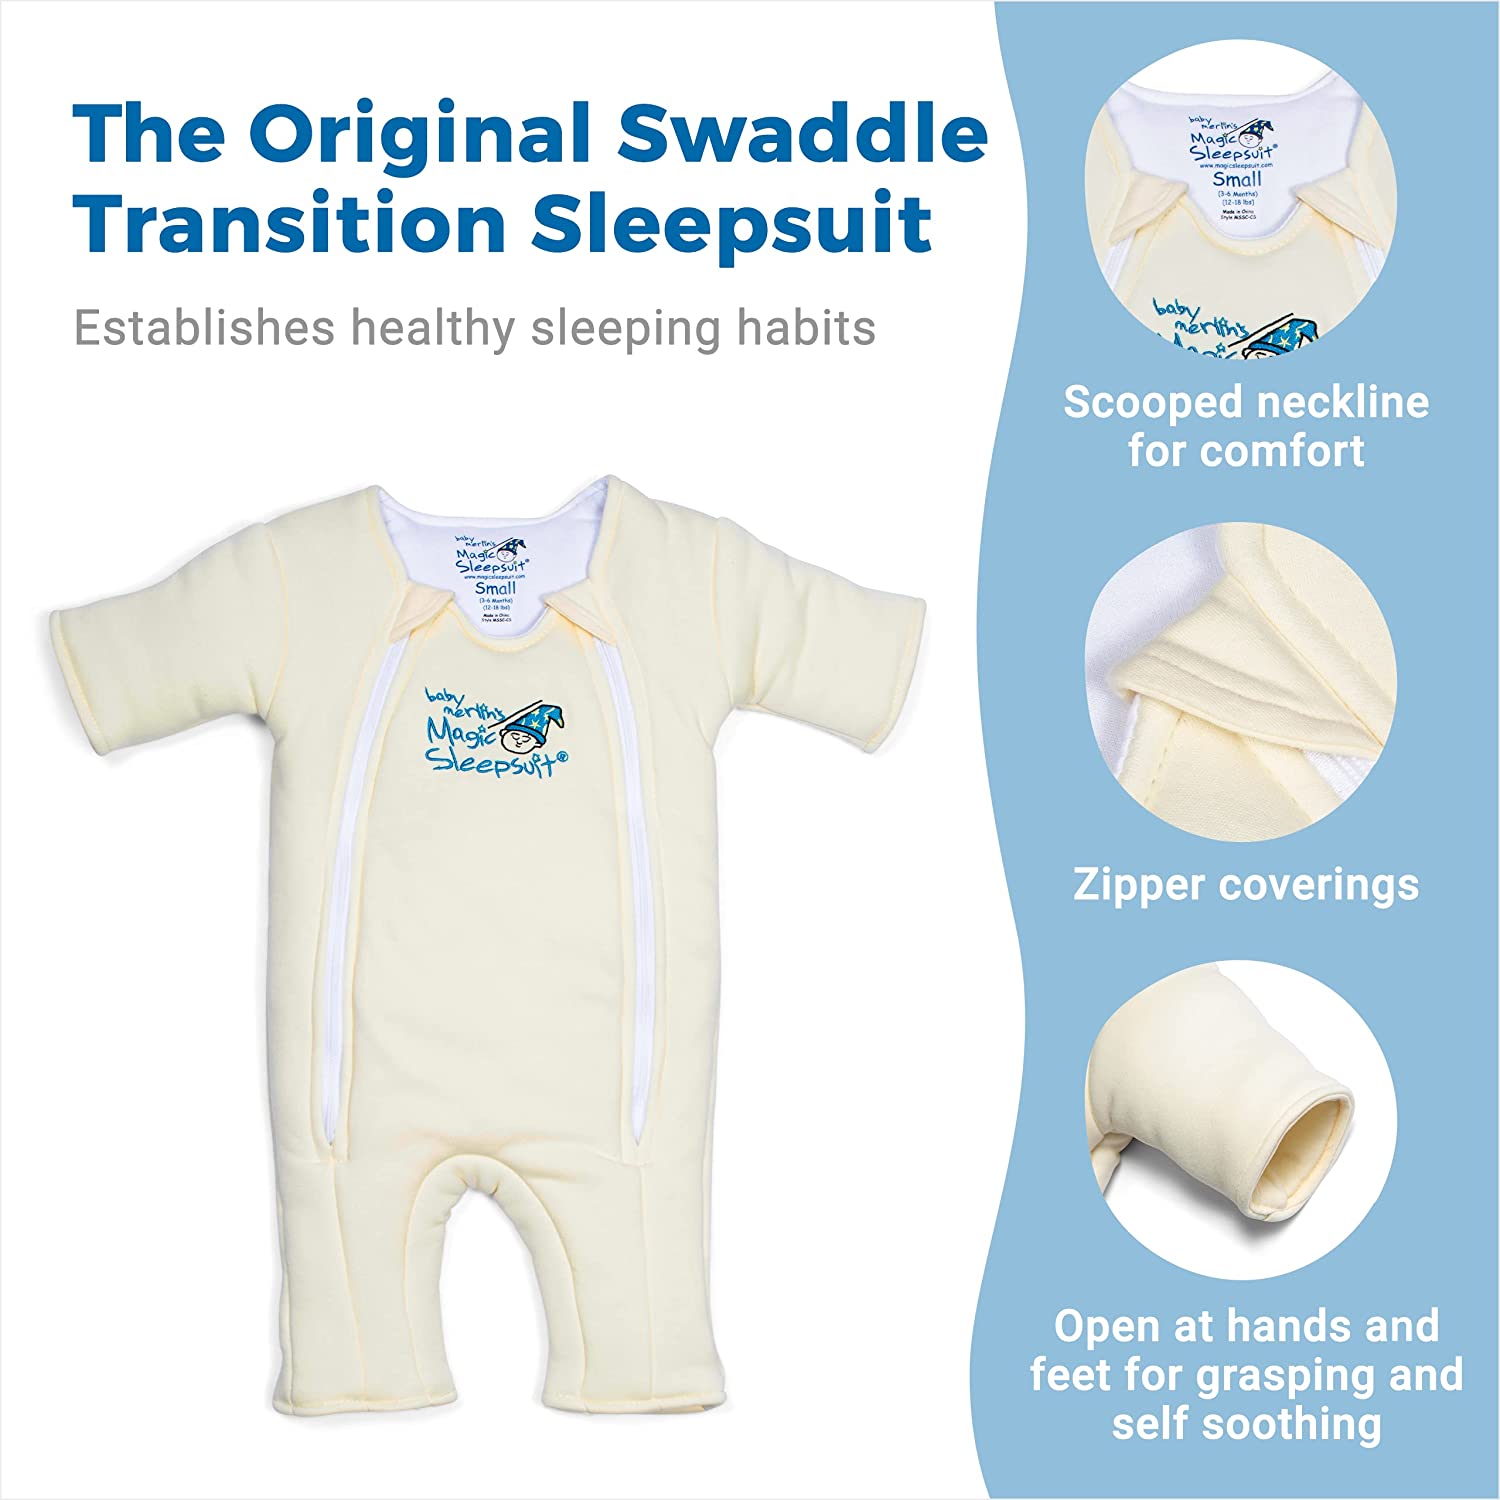 Baby Merlin's Magic Sleepsuit - 100% Cotton Baby Transition Swaddle - Baby Sleep Suit - Cream - 3-6 Months 3-6 Months Cream - image 2 of 7